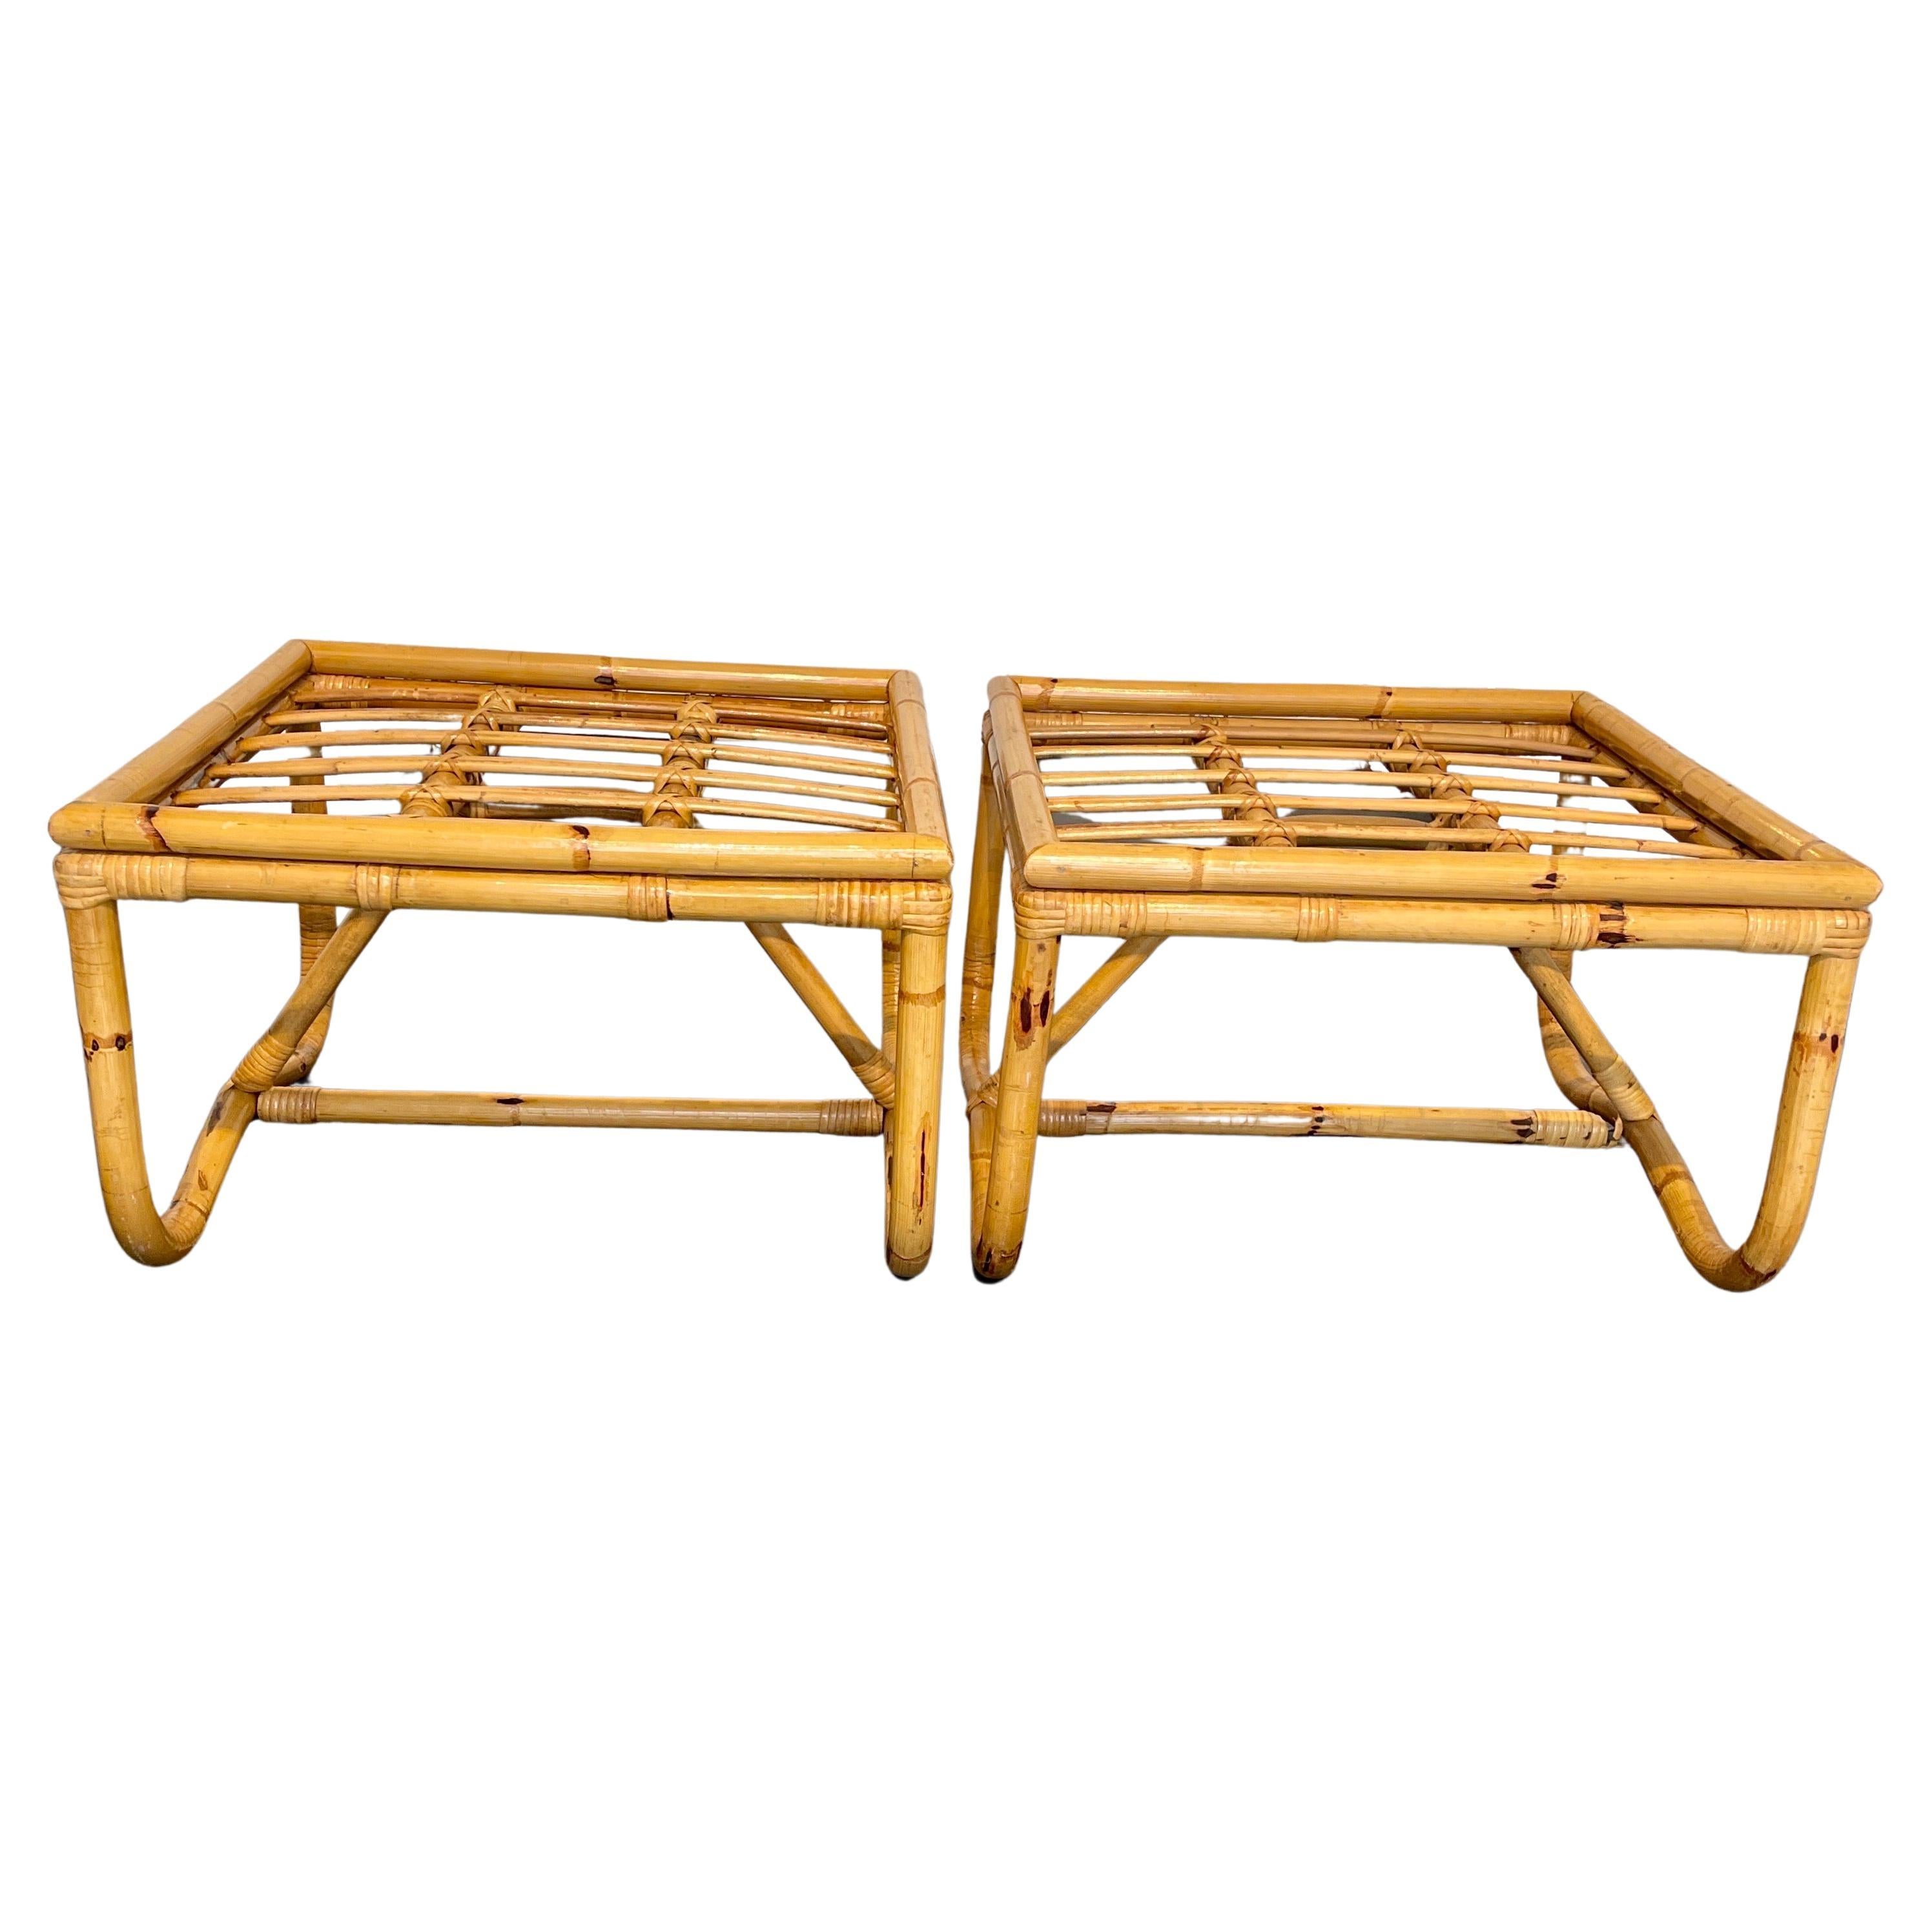 Pair of Mid-Century Modern Bamboo Side Tables or Stools